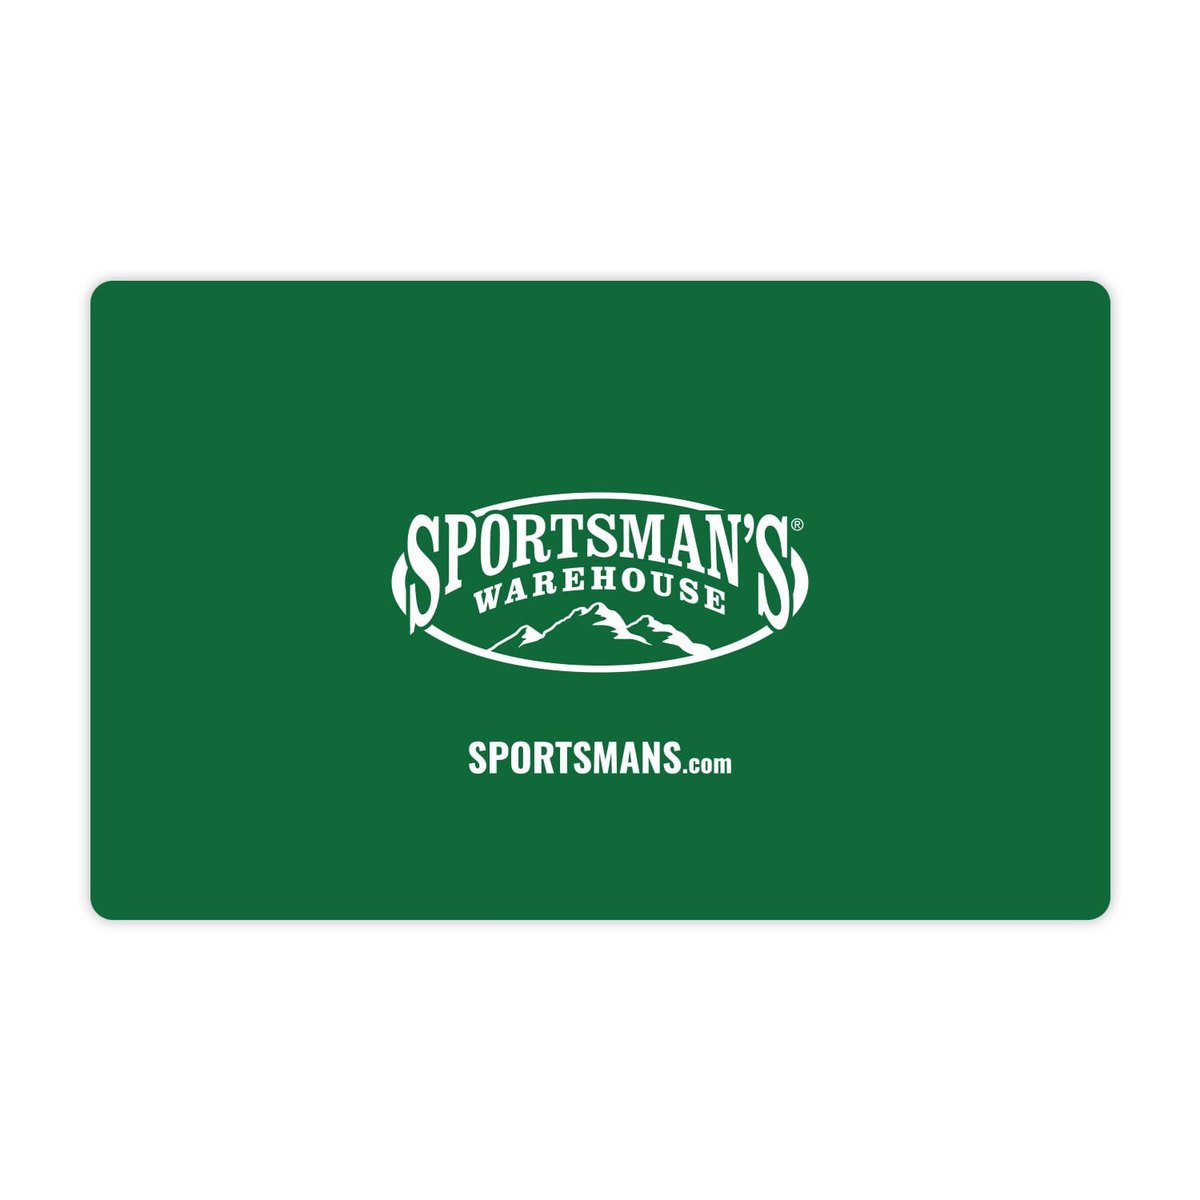 Does Walmart Sell Sportsman's Warehouse Gift Cards?